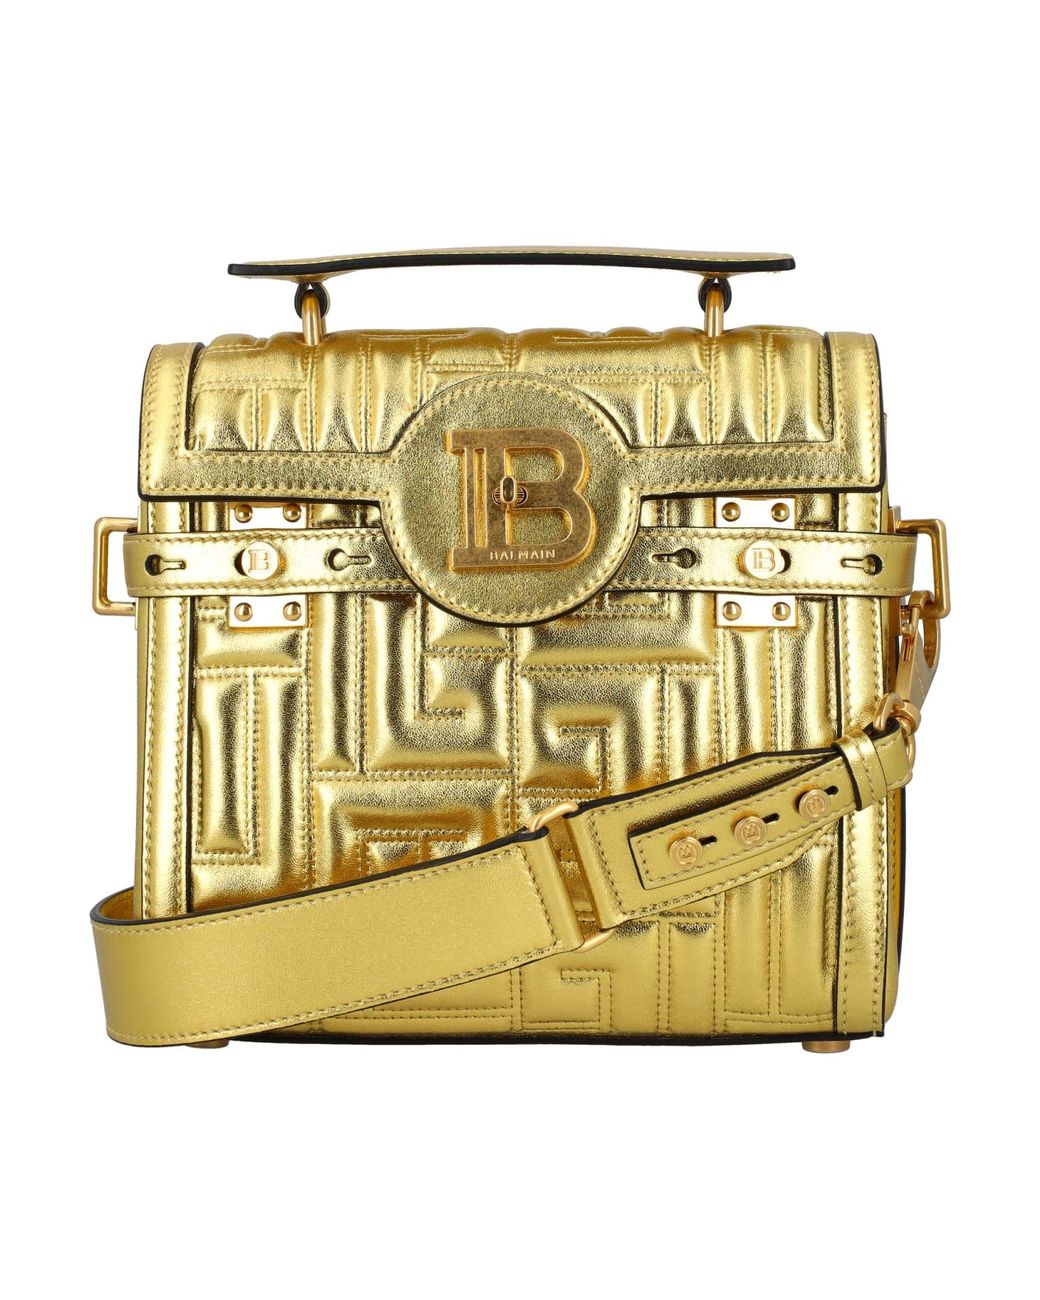 Balmain Quilted Leather B-buzz 23 Bag in Gold (Metallic) | Lyst